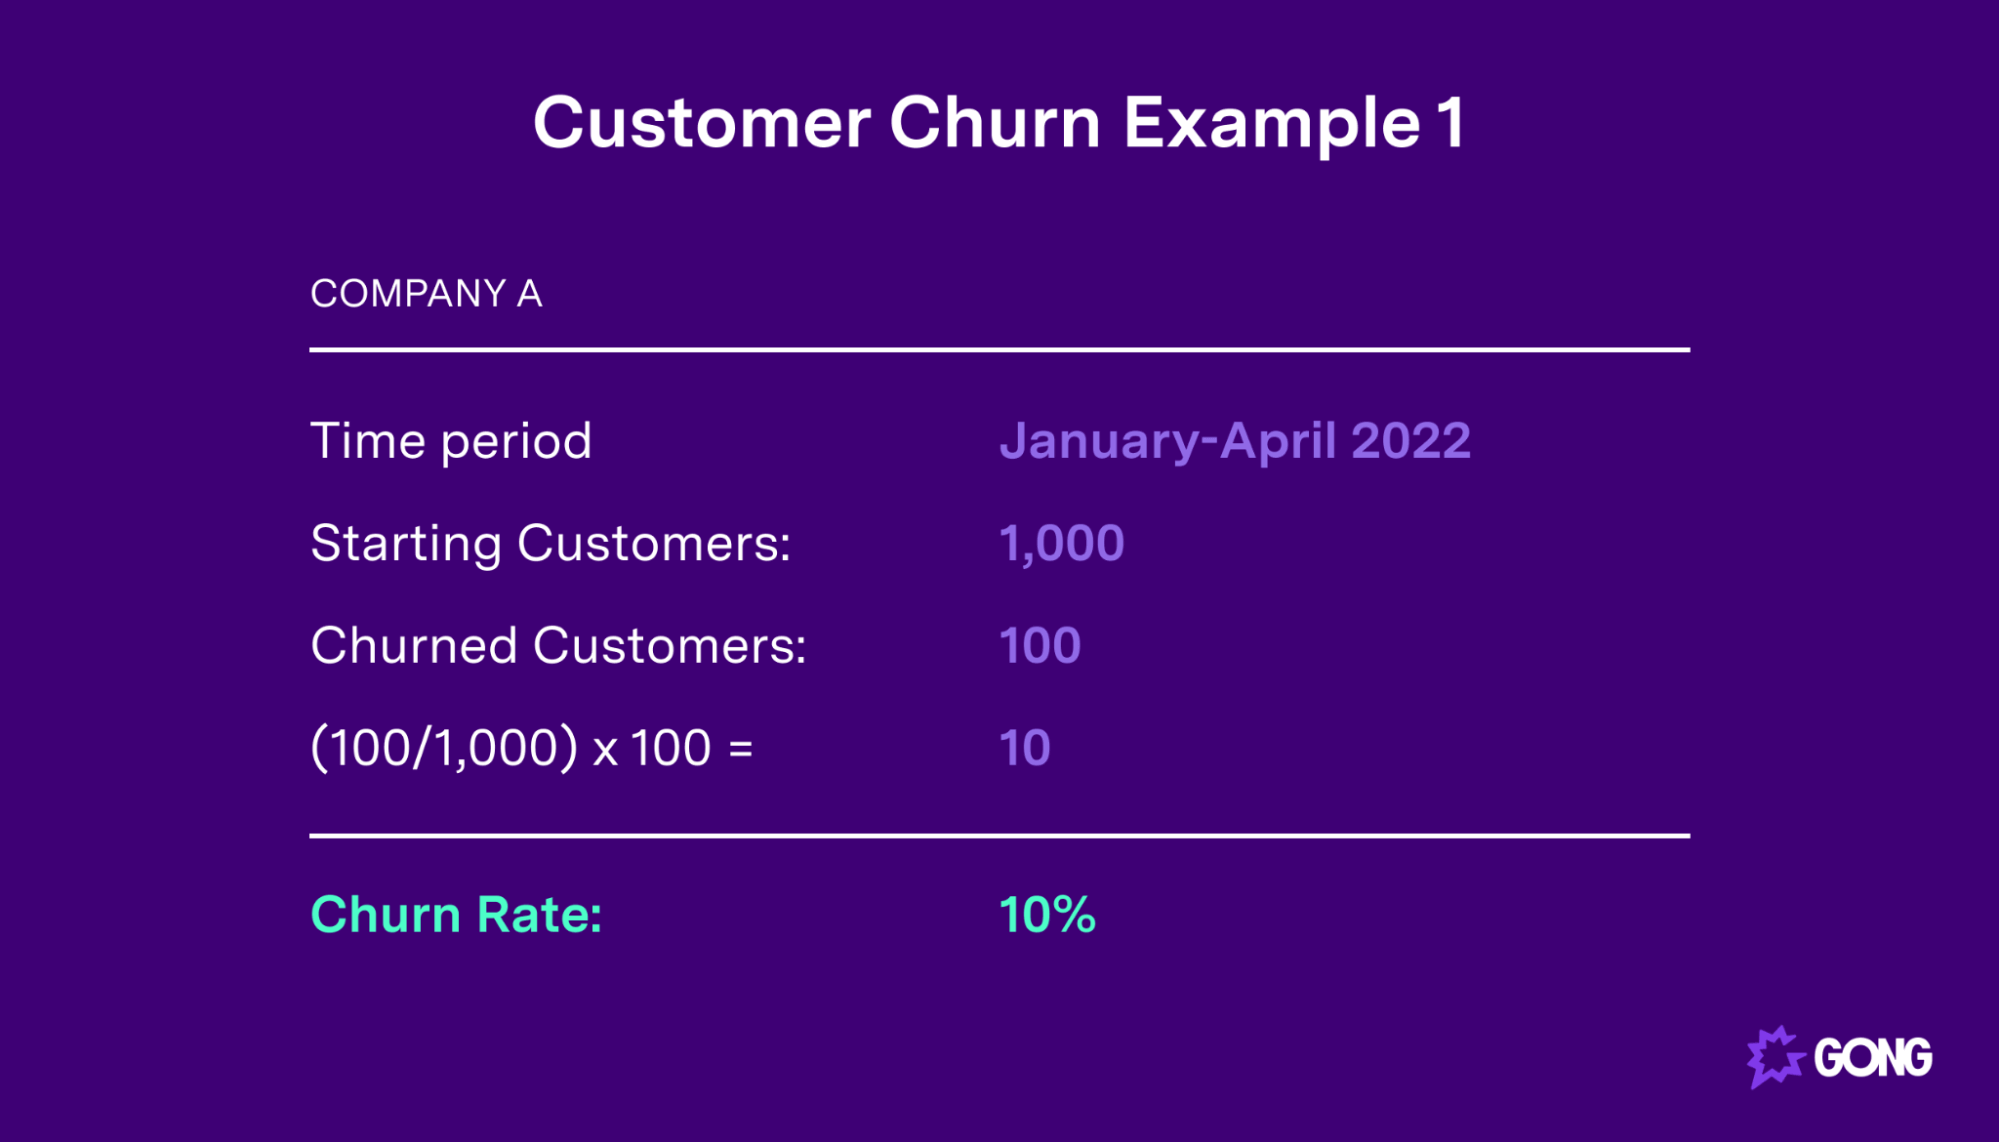 An example of a customer churn rate